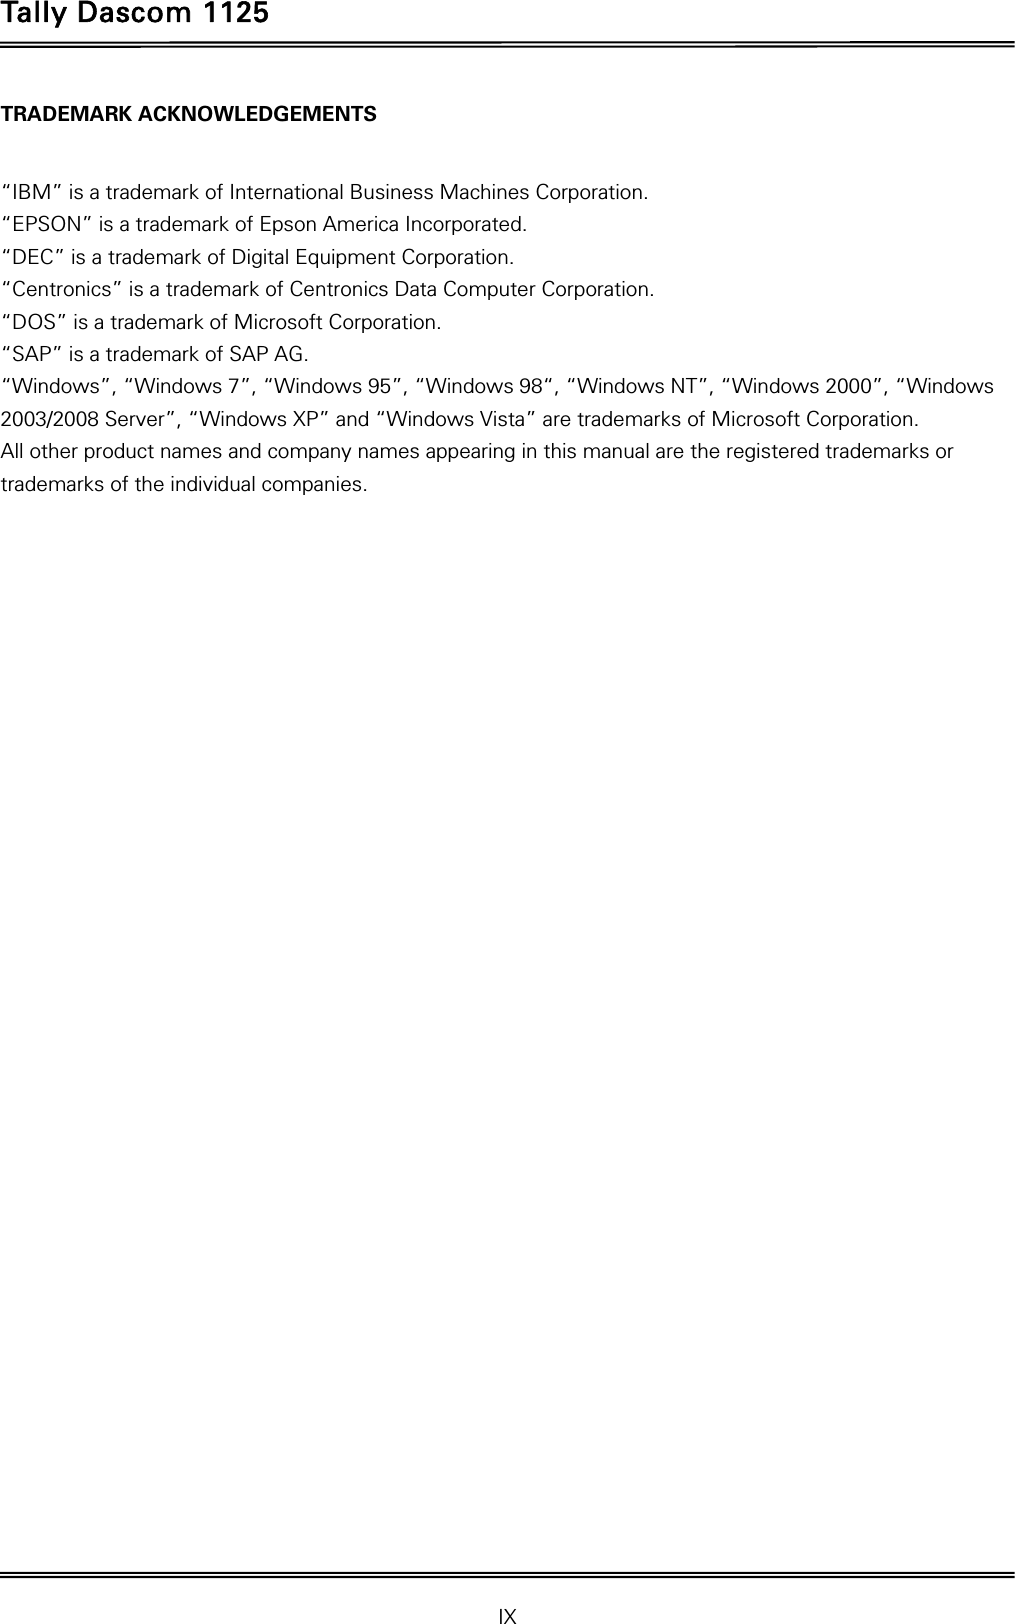 Tally Dascom 1125 IX TRADEMARK ACKNOWLEDGEMENTS  “IBM” is a trademark of International Business Machines Corporation. “EPSON” is a trademark of Epson America Incorporated. “DEC” is a trademark of Digital Equipment Corporation. “Centronics” is a trademark of Centronics Data Computer Corporation. “DOS” is a trademark of Microsoft Corporation. “SAP” is a trademark of SAP AG. “Windows”, “Windows 7”, “Windows 95”, “Windows 98“, “Windows NT”, “Windows 2000”, “Windows 2003/2008 Server”, “Windows XP” and “Windows Vista” are trademarks of Microsoft Corporation. All other product names and company names appearing in this manual are the registered trademarks or trademarks of the individual companies.  